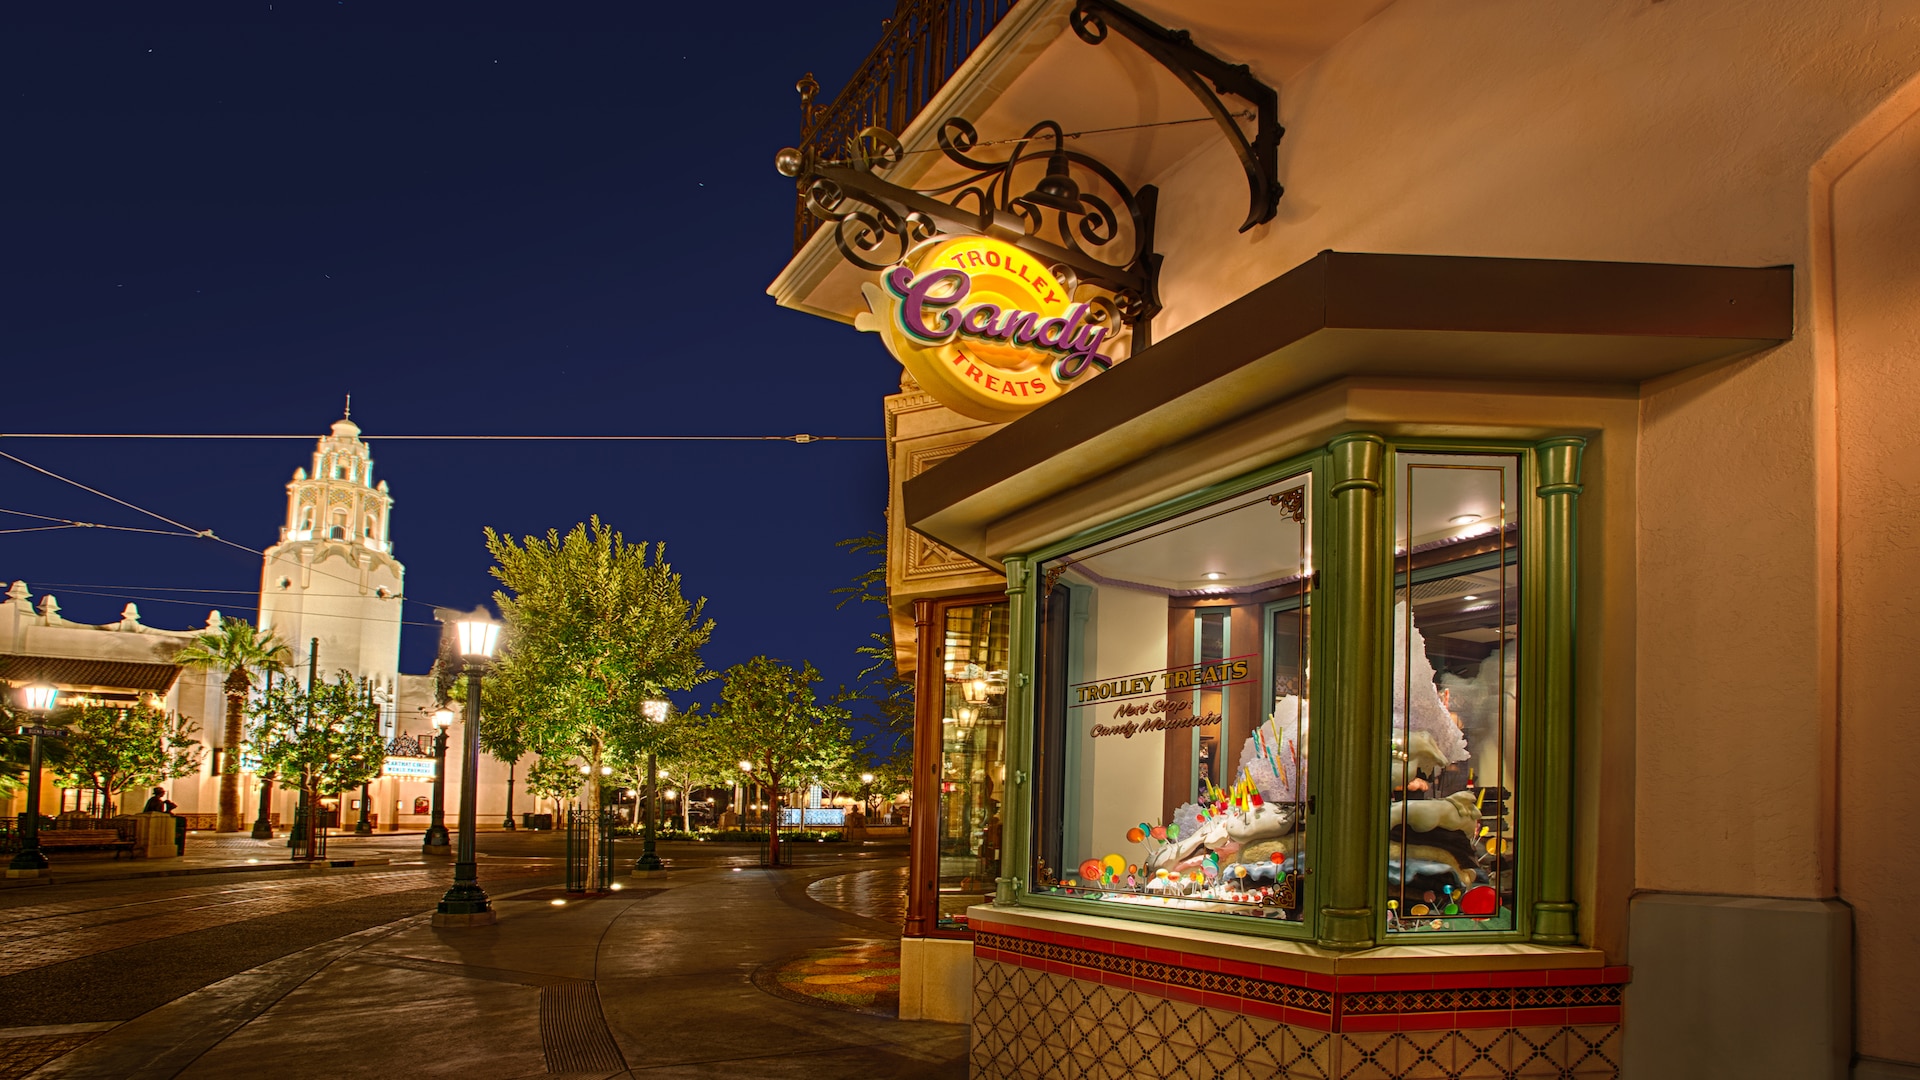 Buena Vista Street glowing at night as sweets are featured in the window display at Trolley Treats